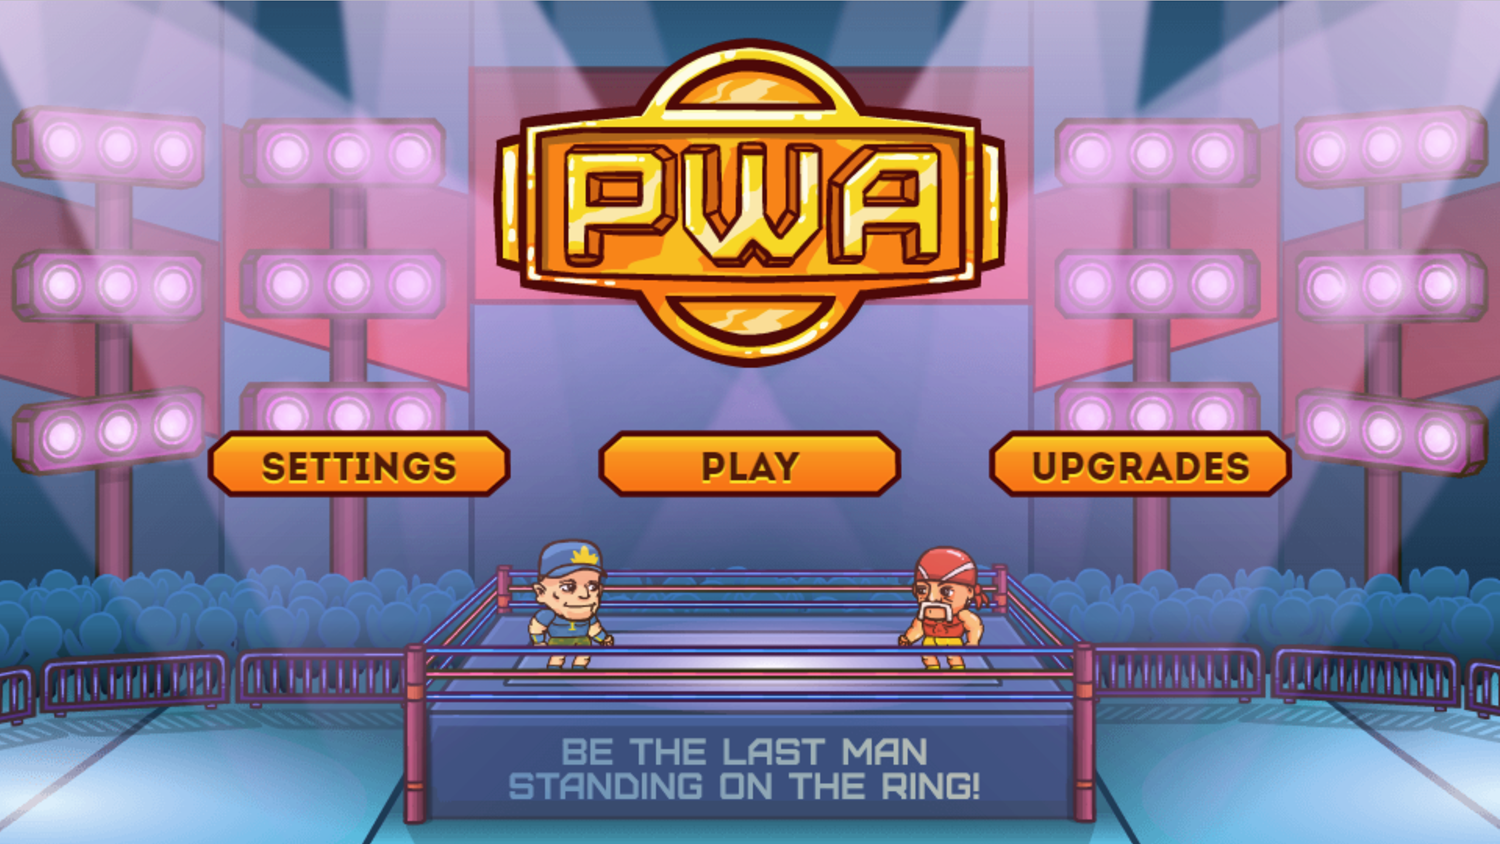 Pro Wrestling Action Game Welcome Screen Screenshot.